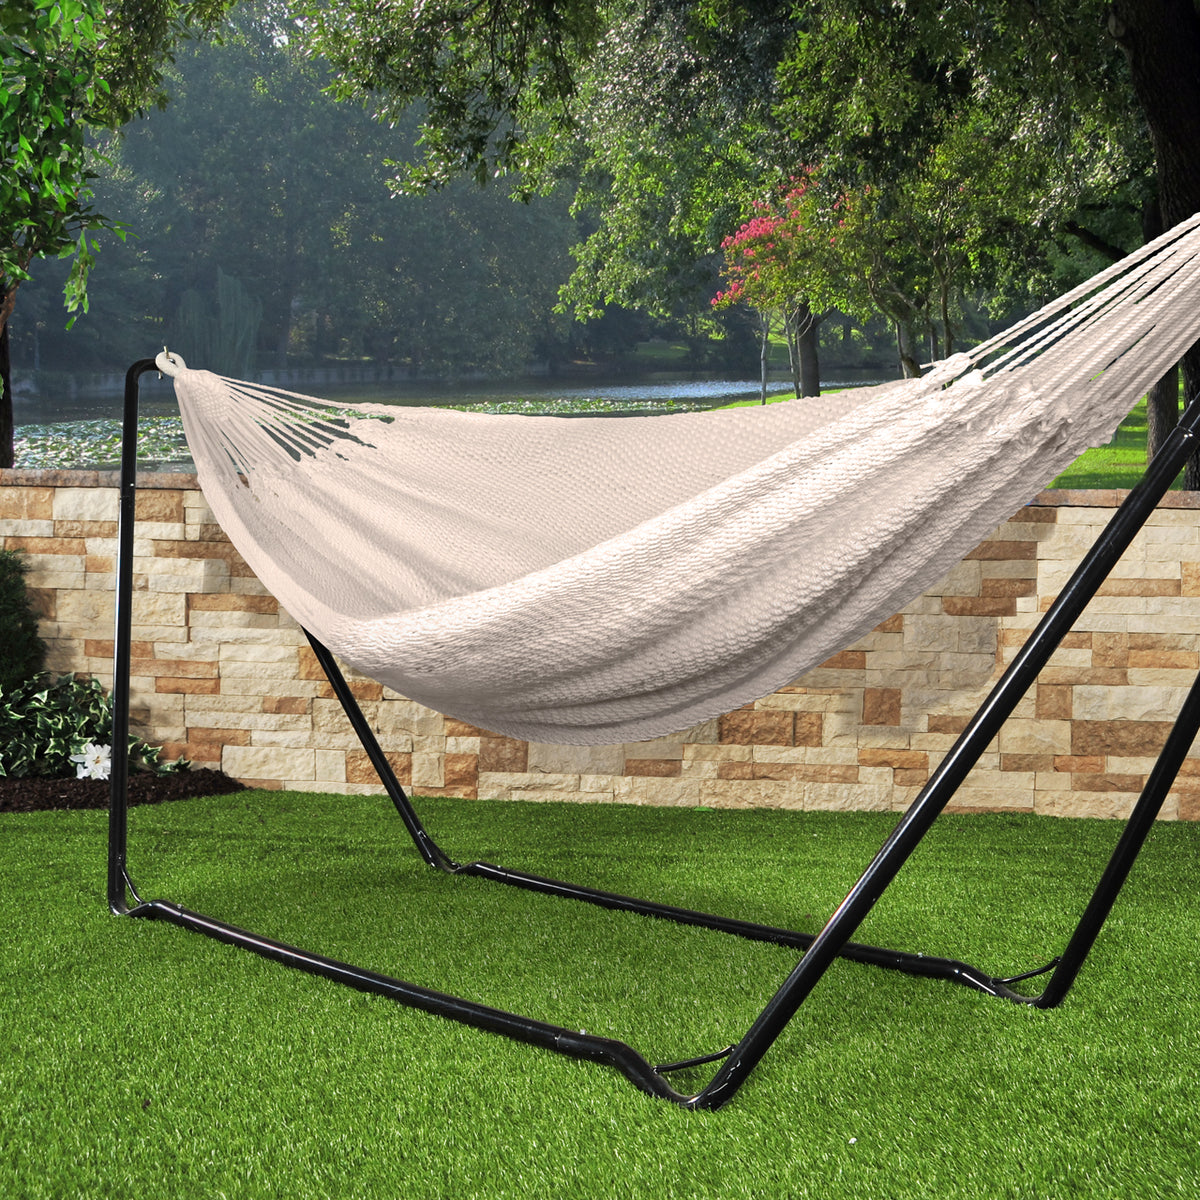 Bliss Hammocks 60-inch Wide Brazilian Style Oversized Rope Hammock with Braided Rope Ends attached to a Bliss Hammocks Stand in the grass.